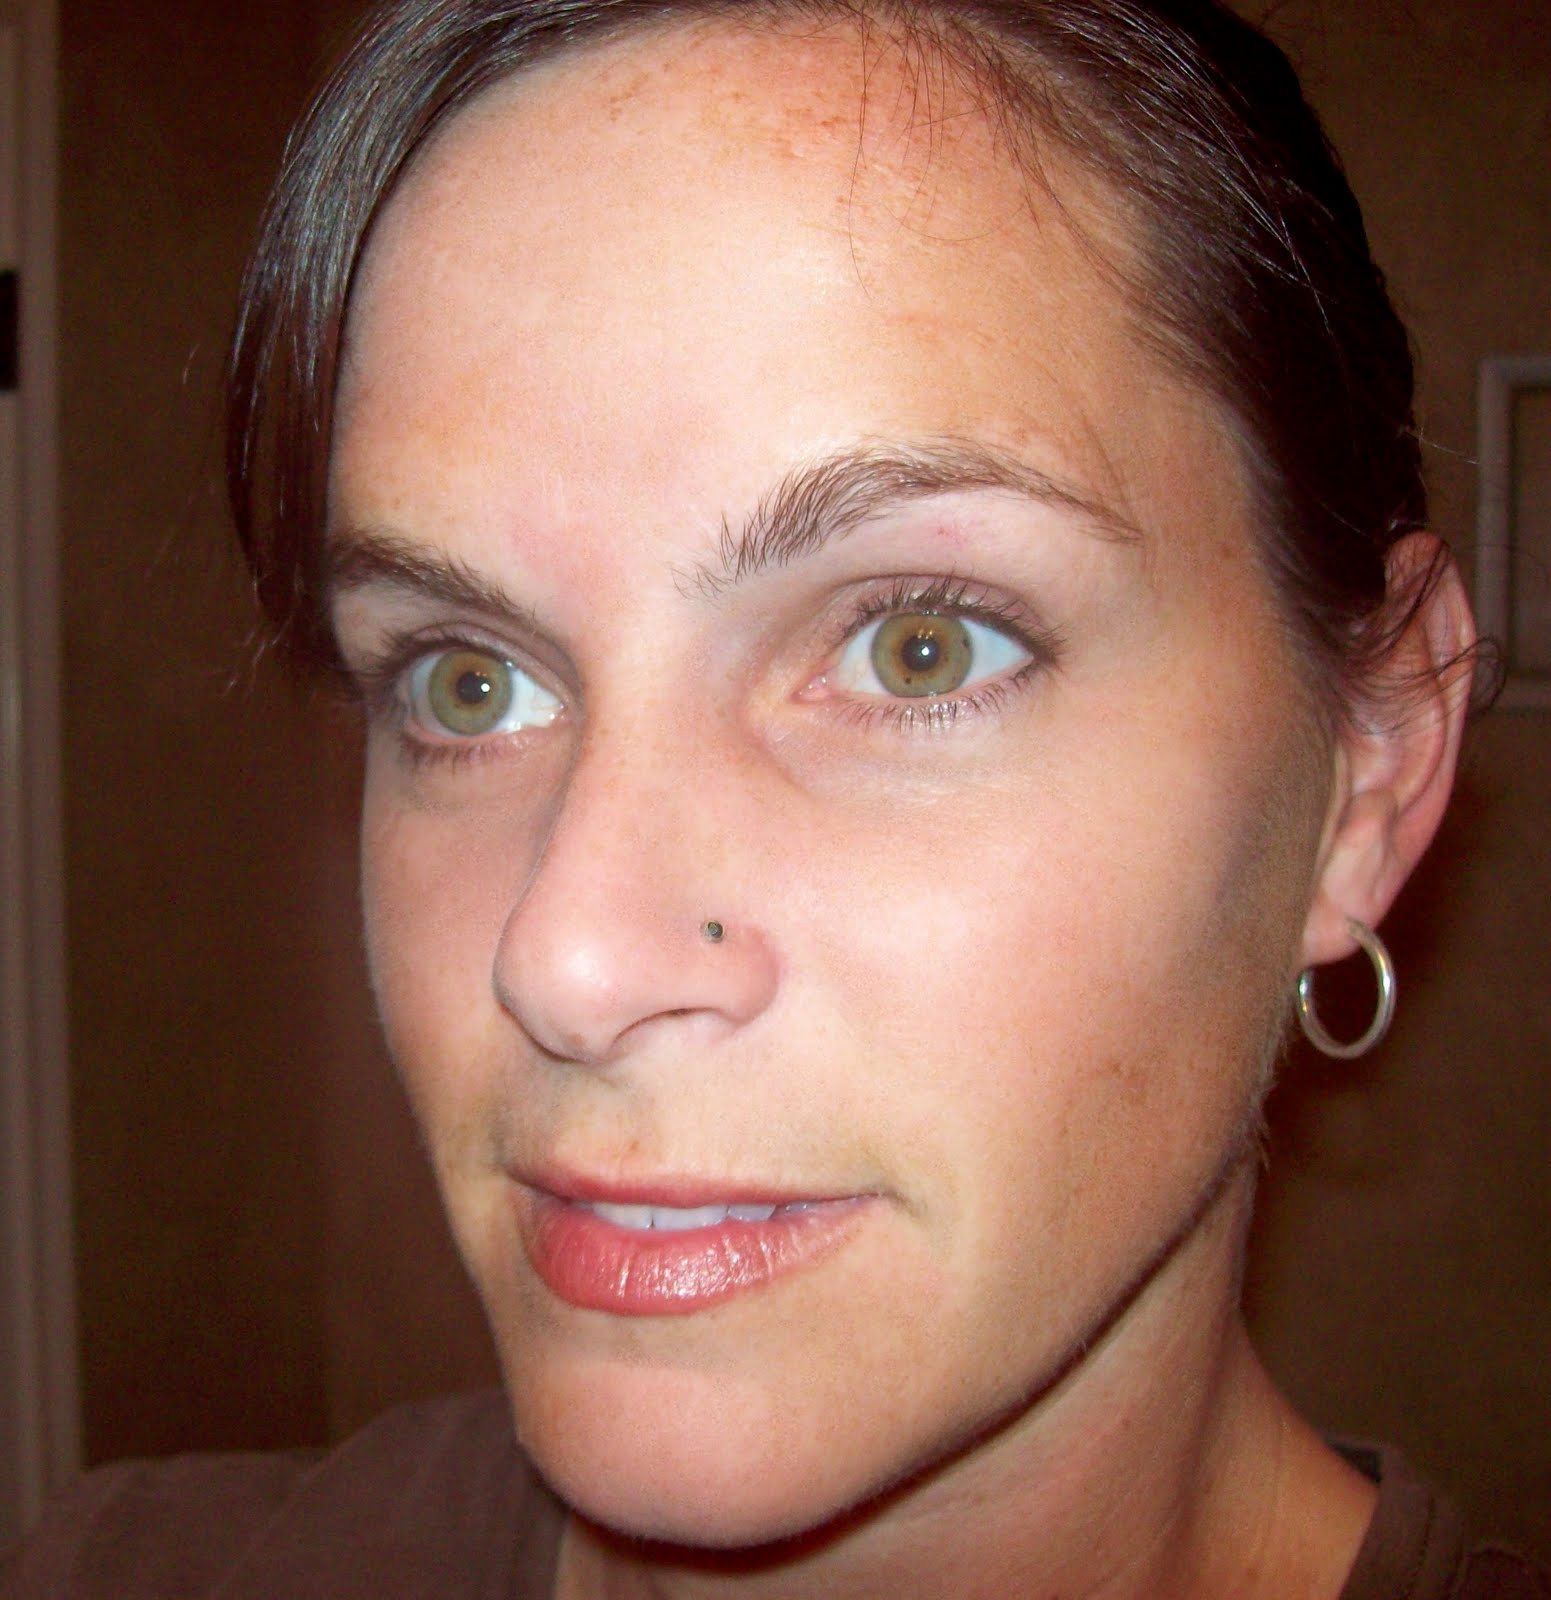 Woman With Left Ear Lobe And Nostril Piercing